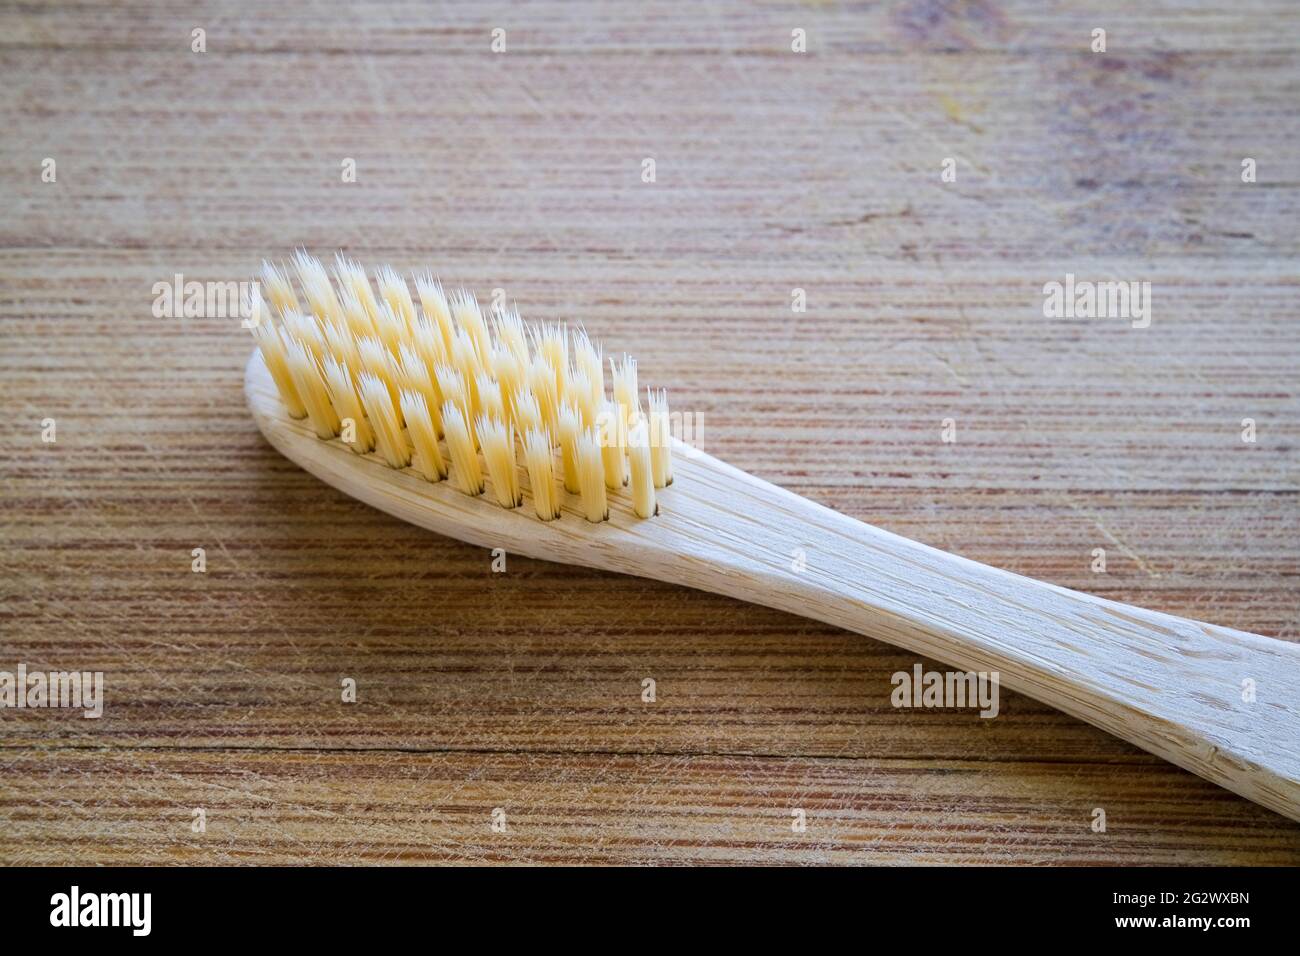 Toothbrush made of bamboo on a wooden background Stock Photo